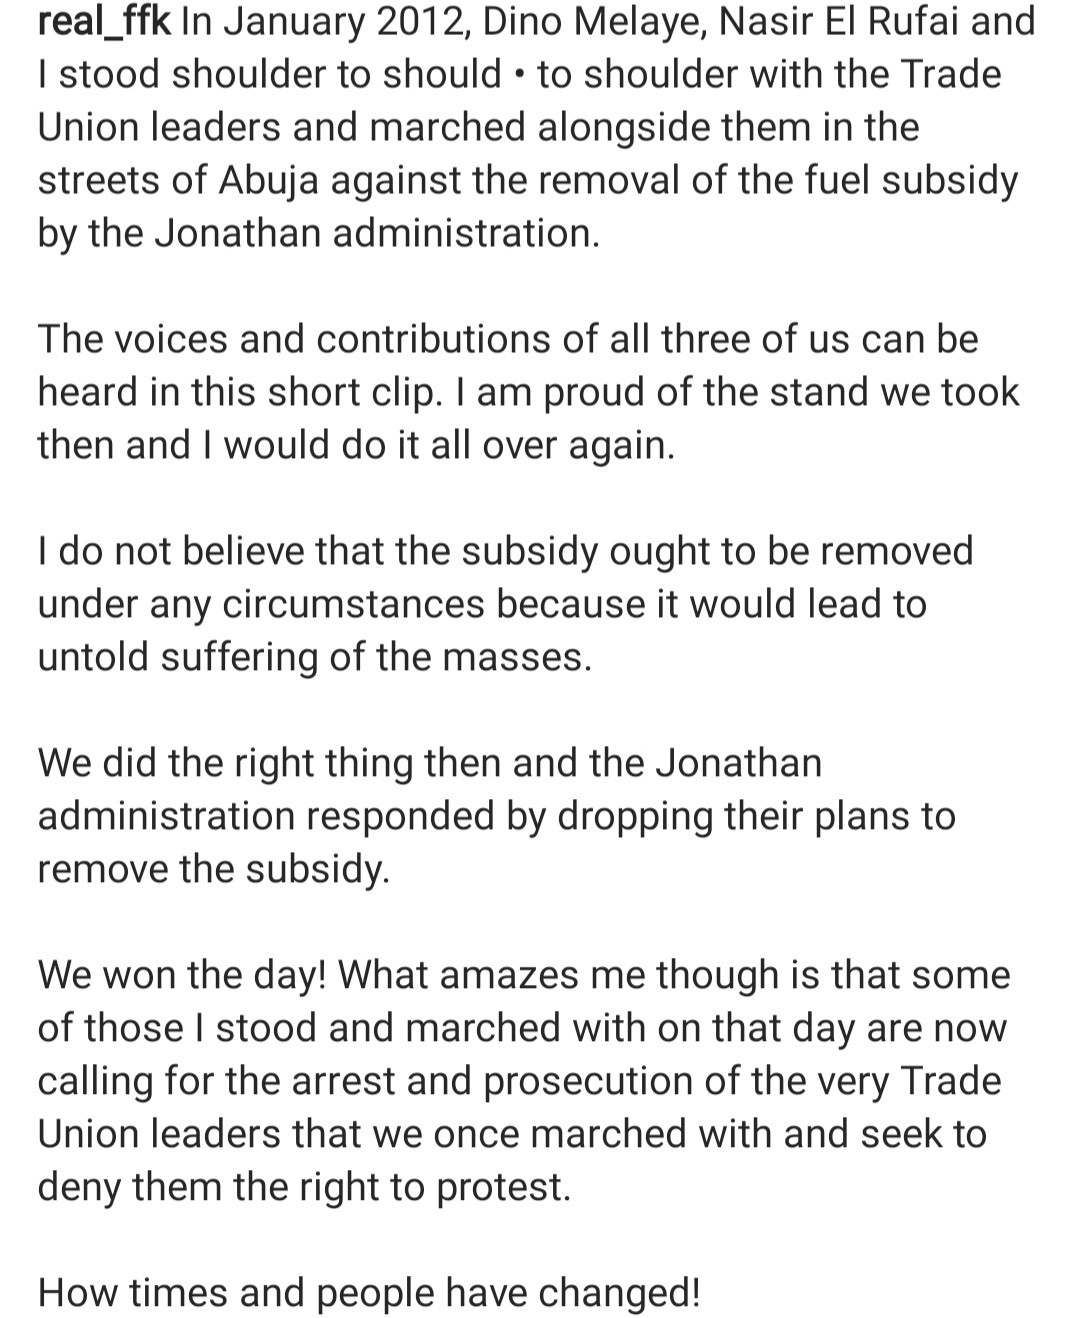 "How time flies and people have changed" FFK says as he shares old clips of him and El-Rufai protesting with Trade Union Leaders against removal of fuel subsidy by Jonathan administration